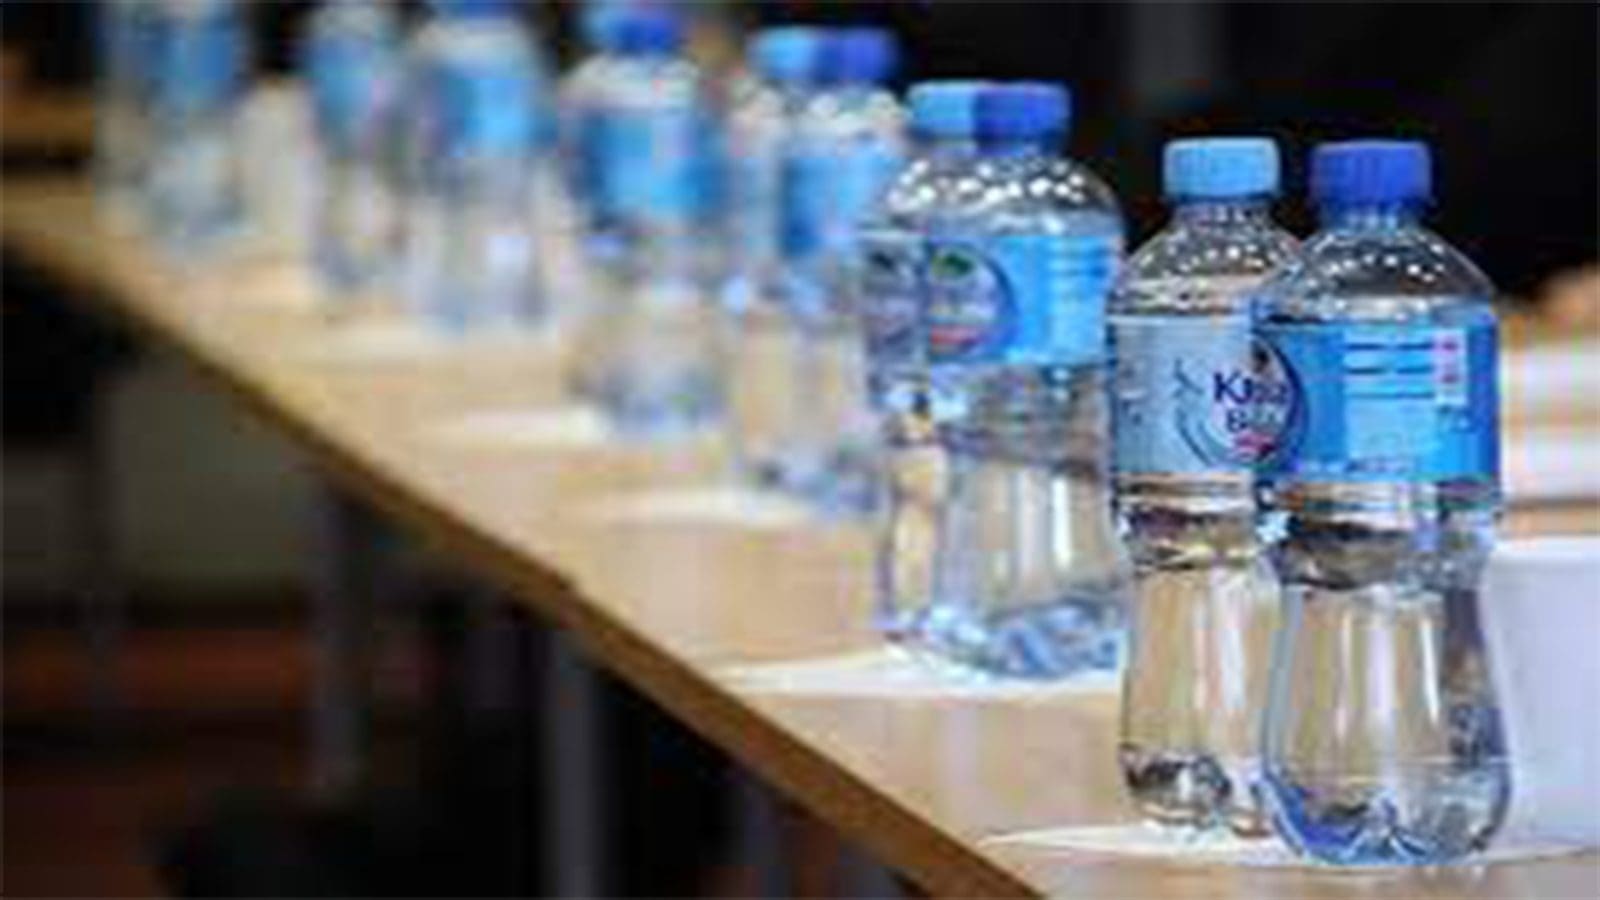 Food safety Commissioner in India’s Tamil Nadu state orders bottled drinking water companies to ensure safety